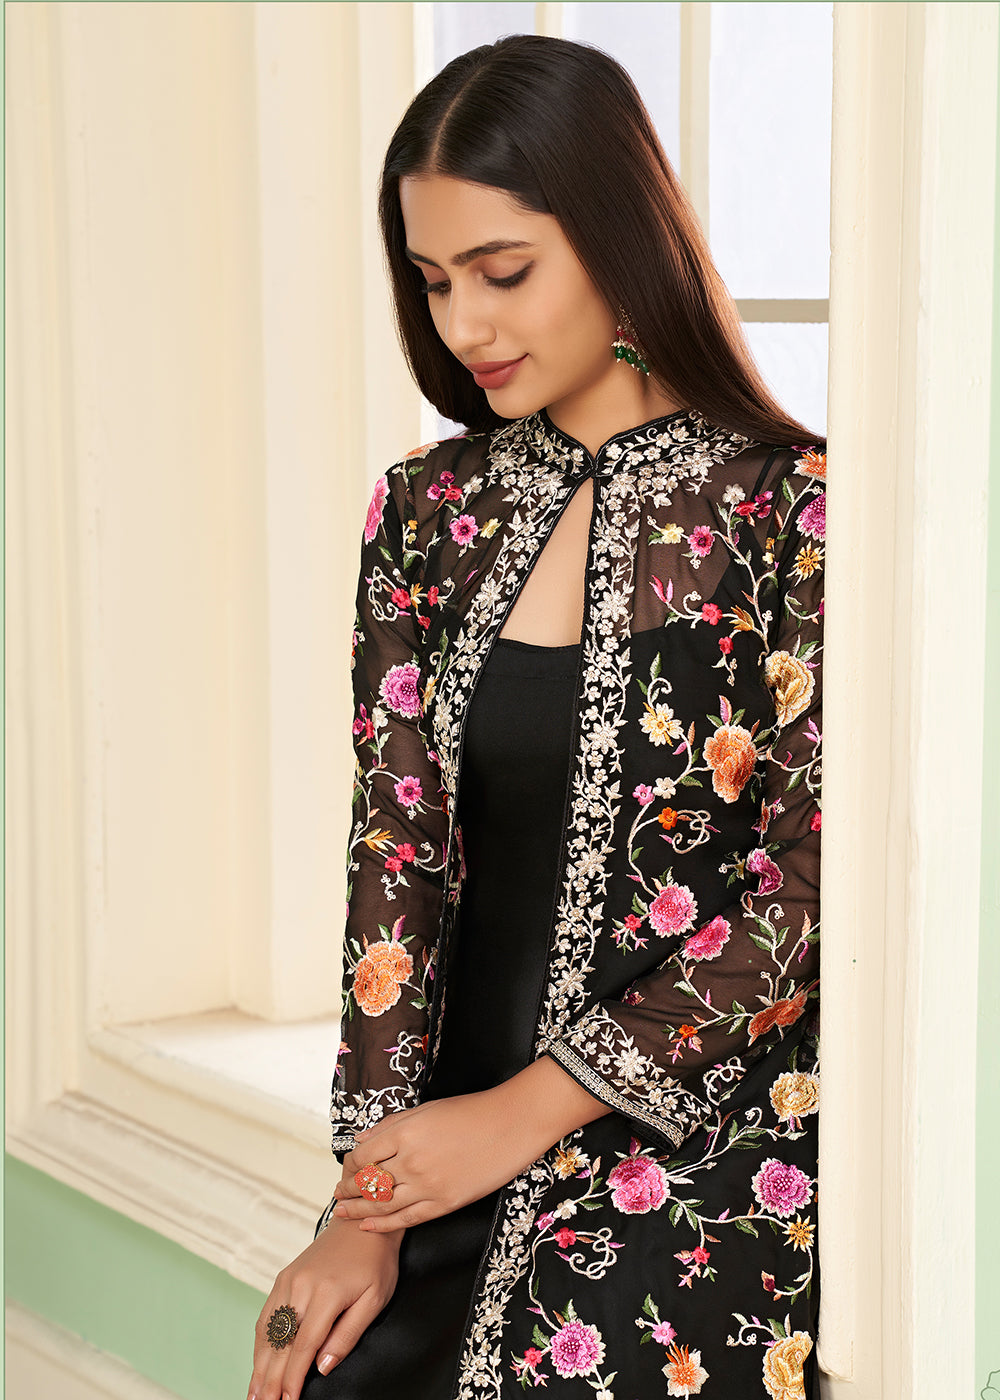 Buy Now Pant Style Sassy Black Party Wear Jacket Style Salwar Suit Online in USA, UK, Canada, Germany, Australia & Worldwide at Empress Clothing.